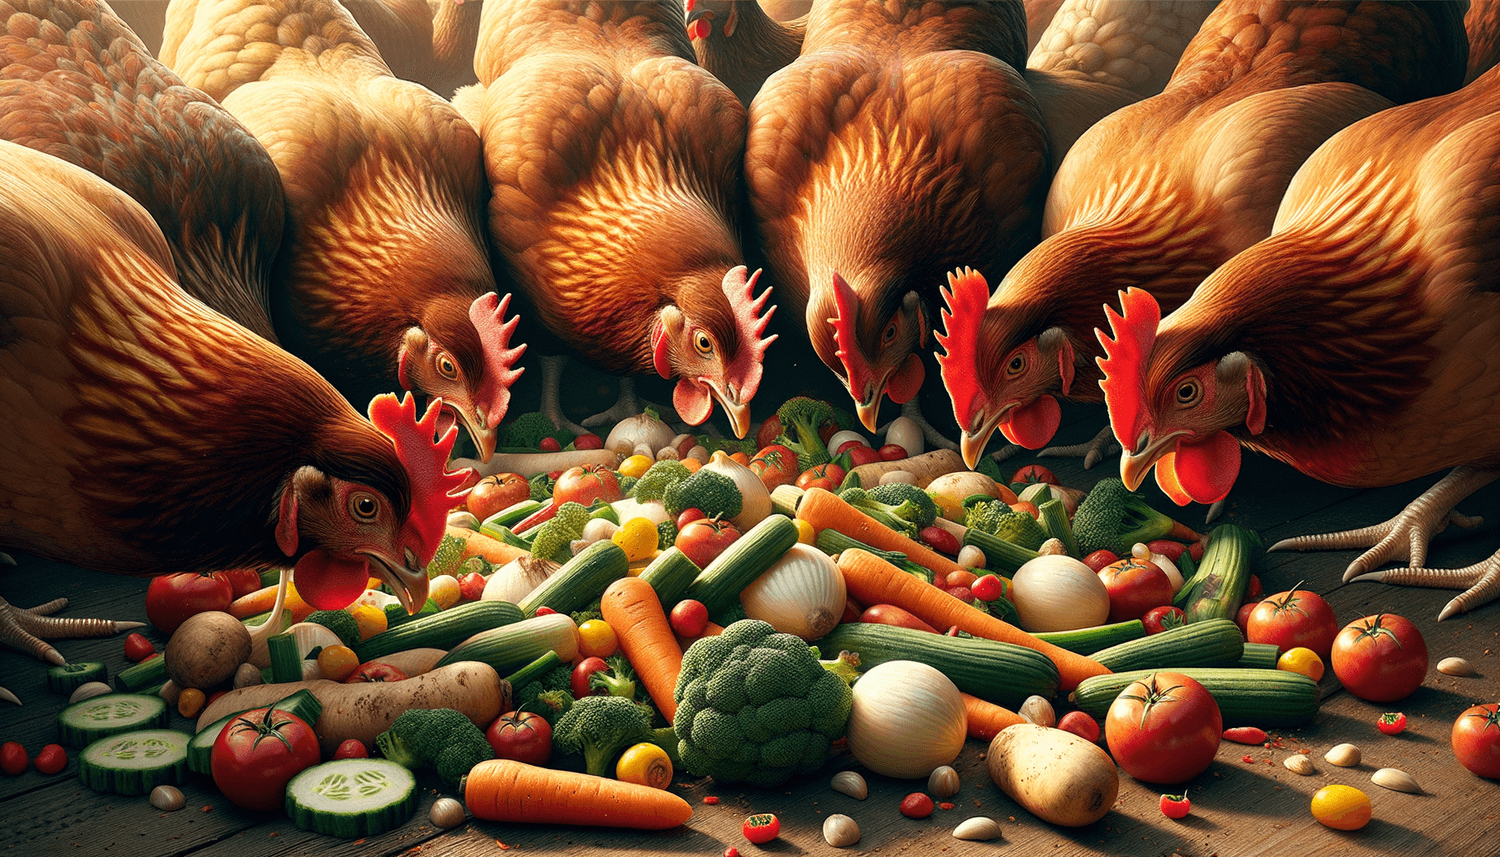 Can Chickens Eat Raw Vegetables?